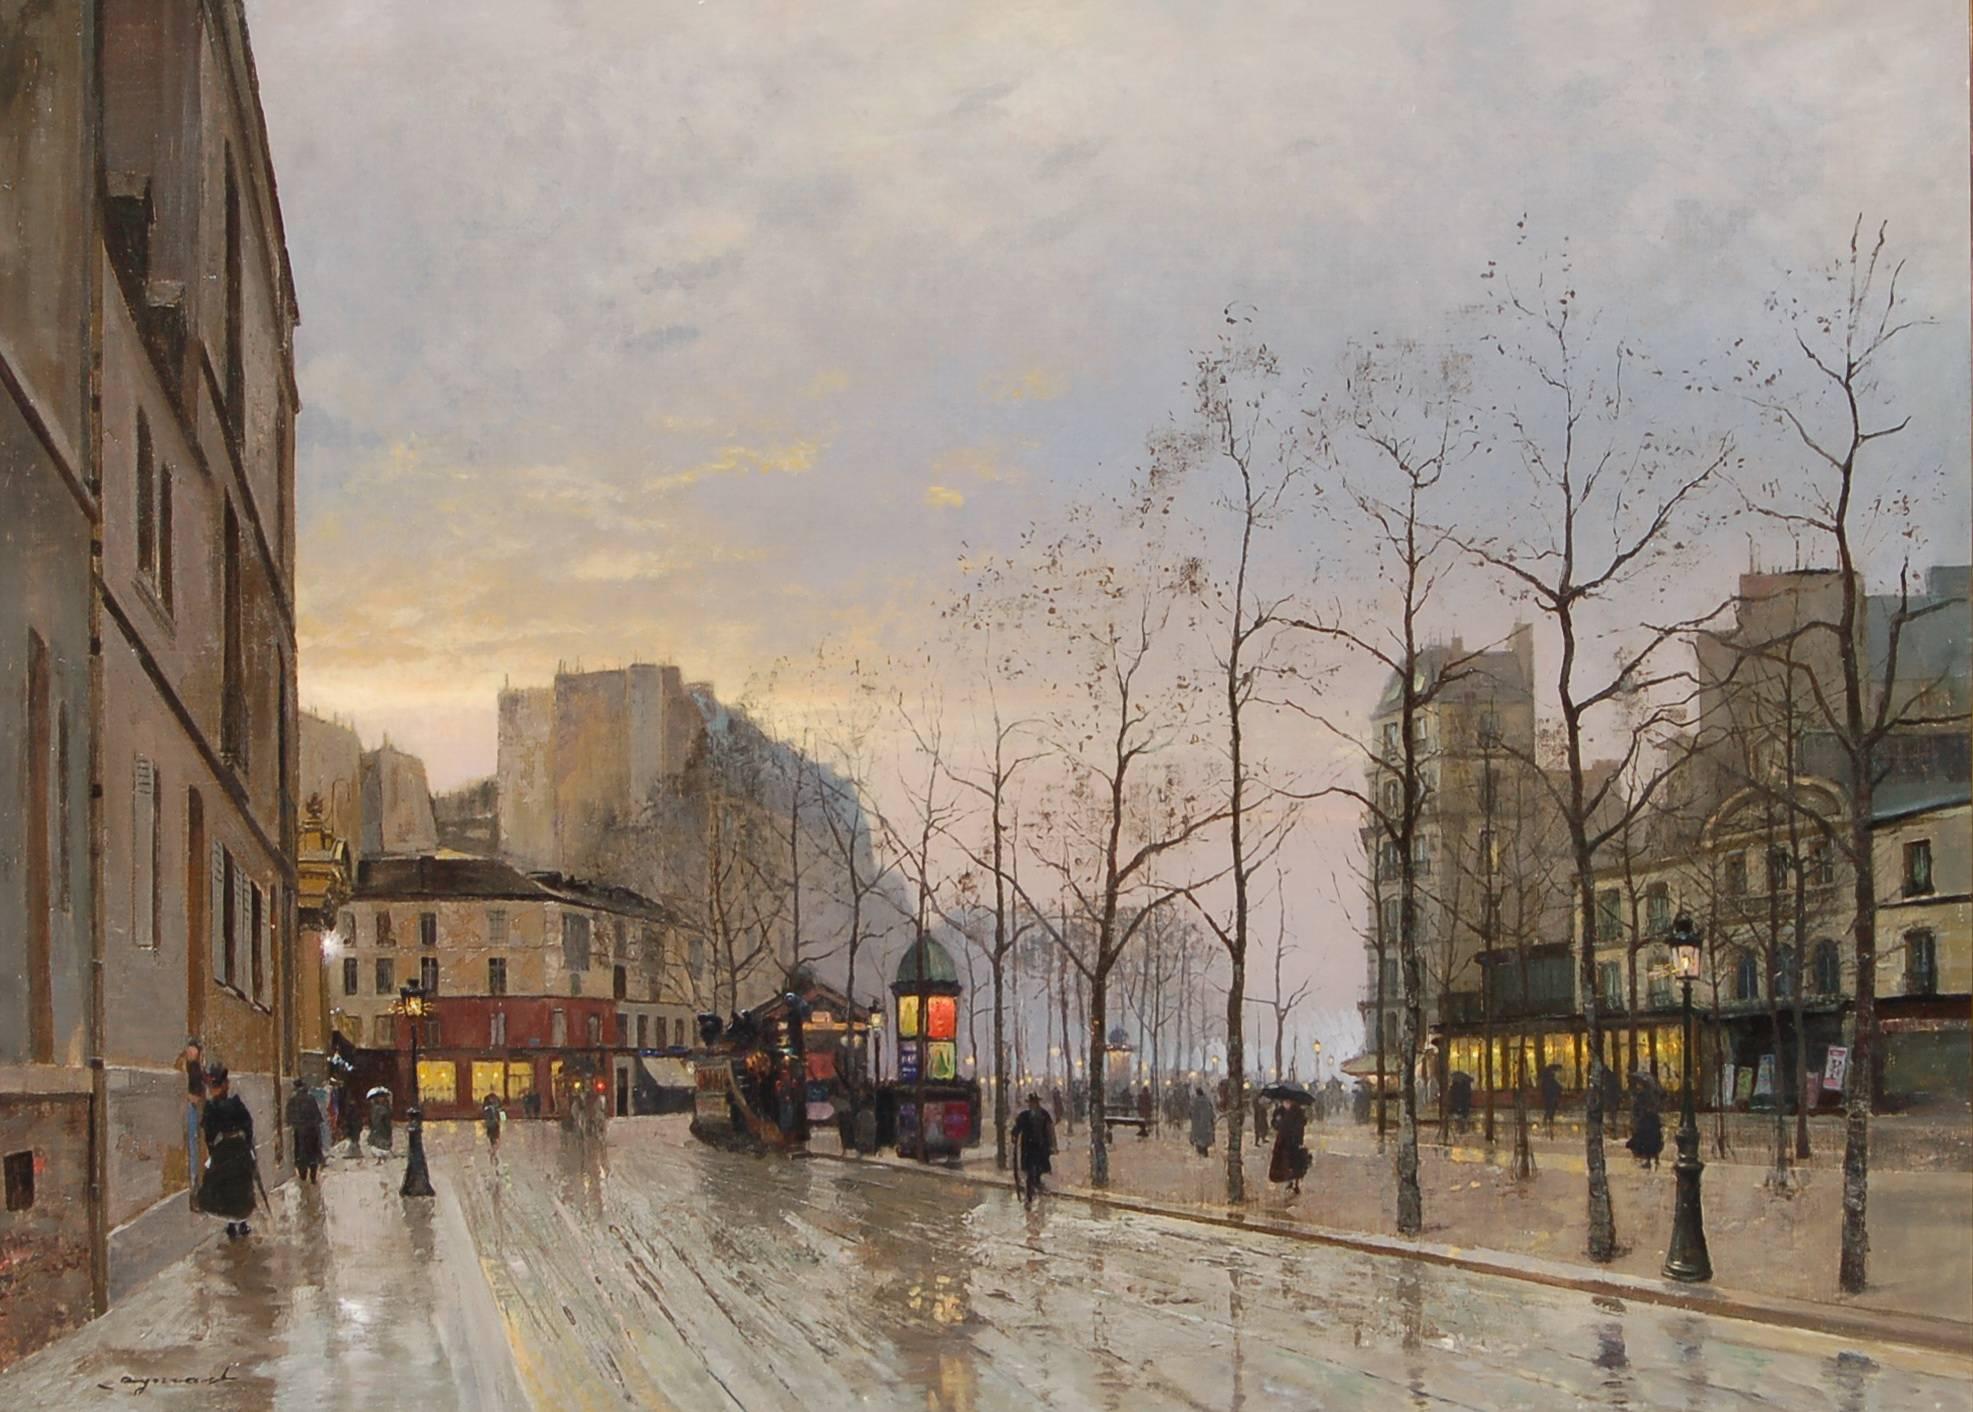 Paris at Night, Boulevard Rochechouart - Painting by Emile Cagniart